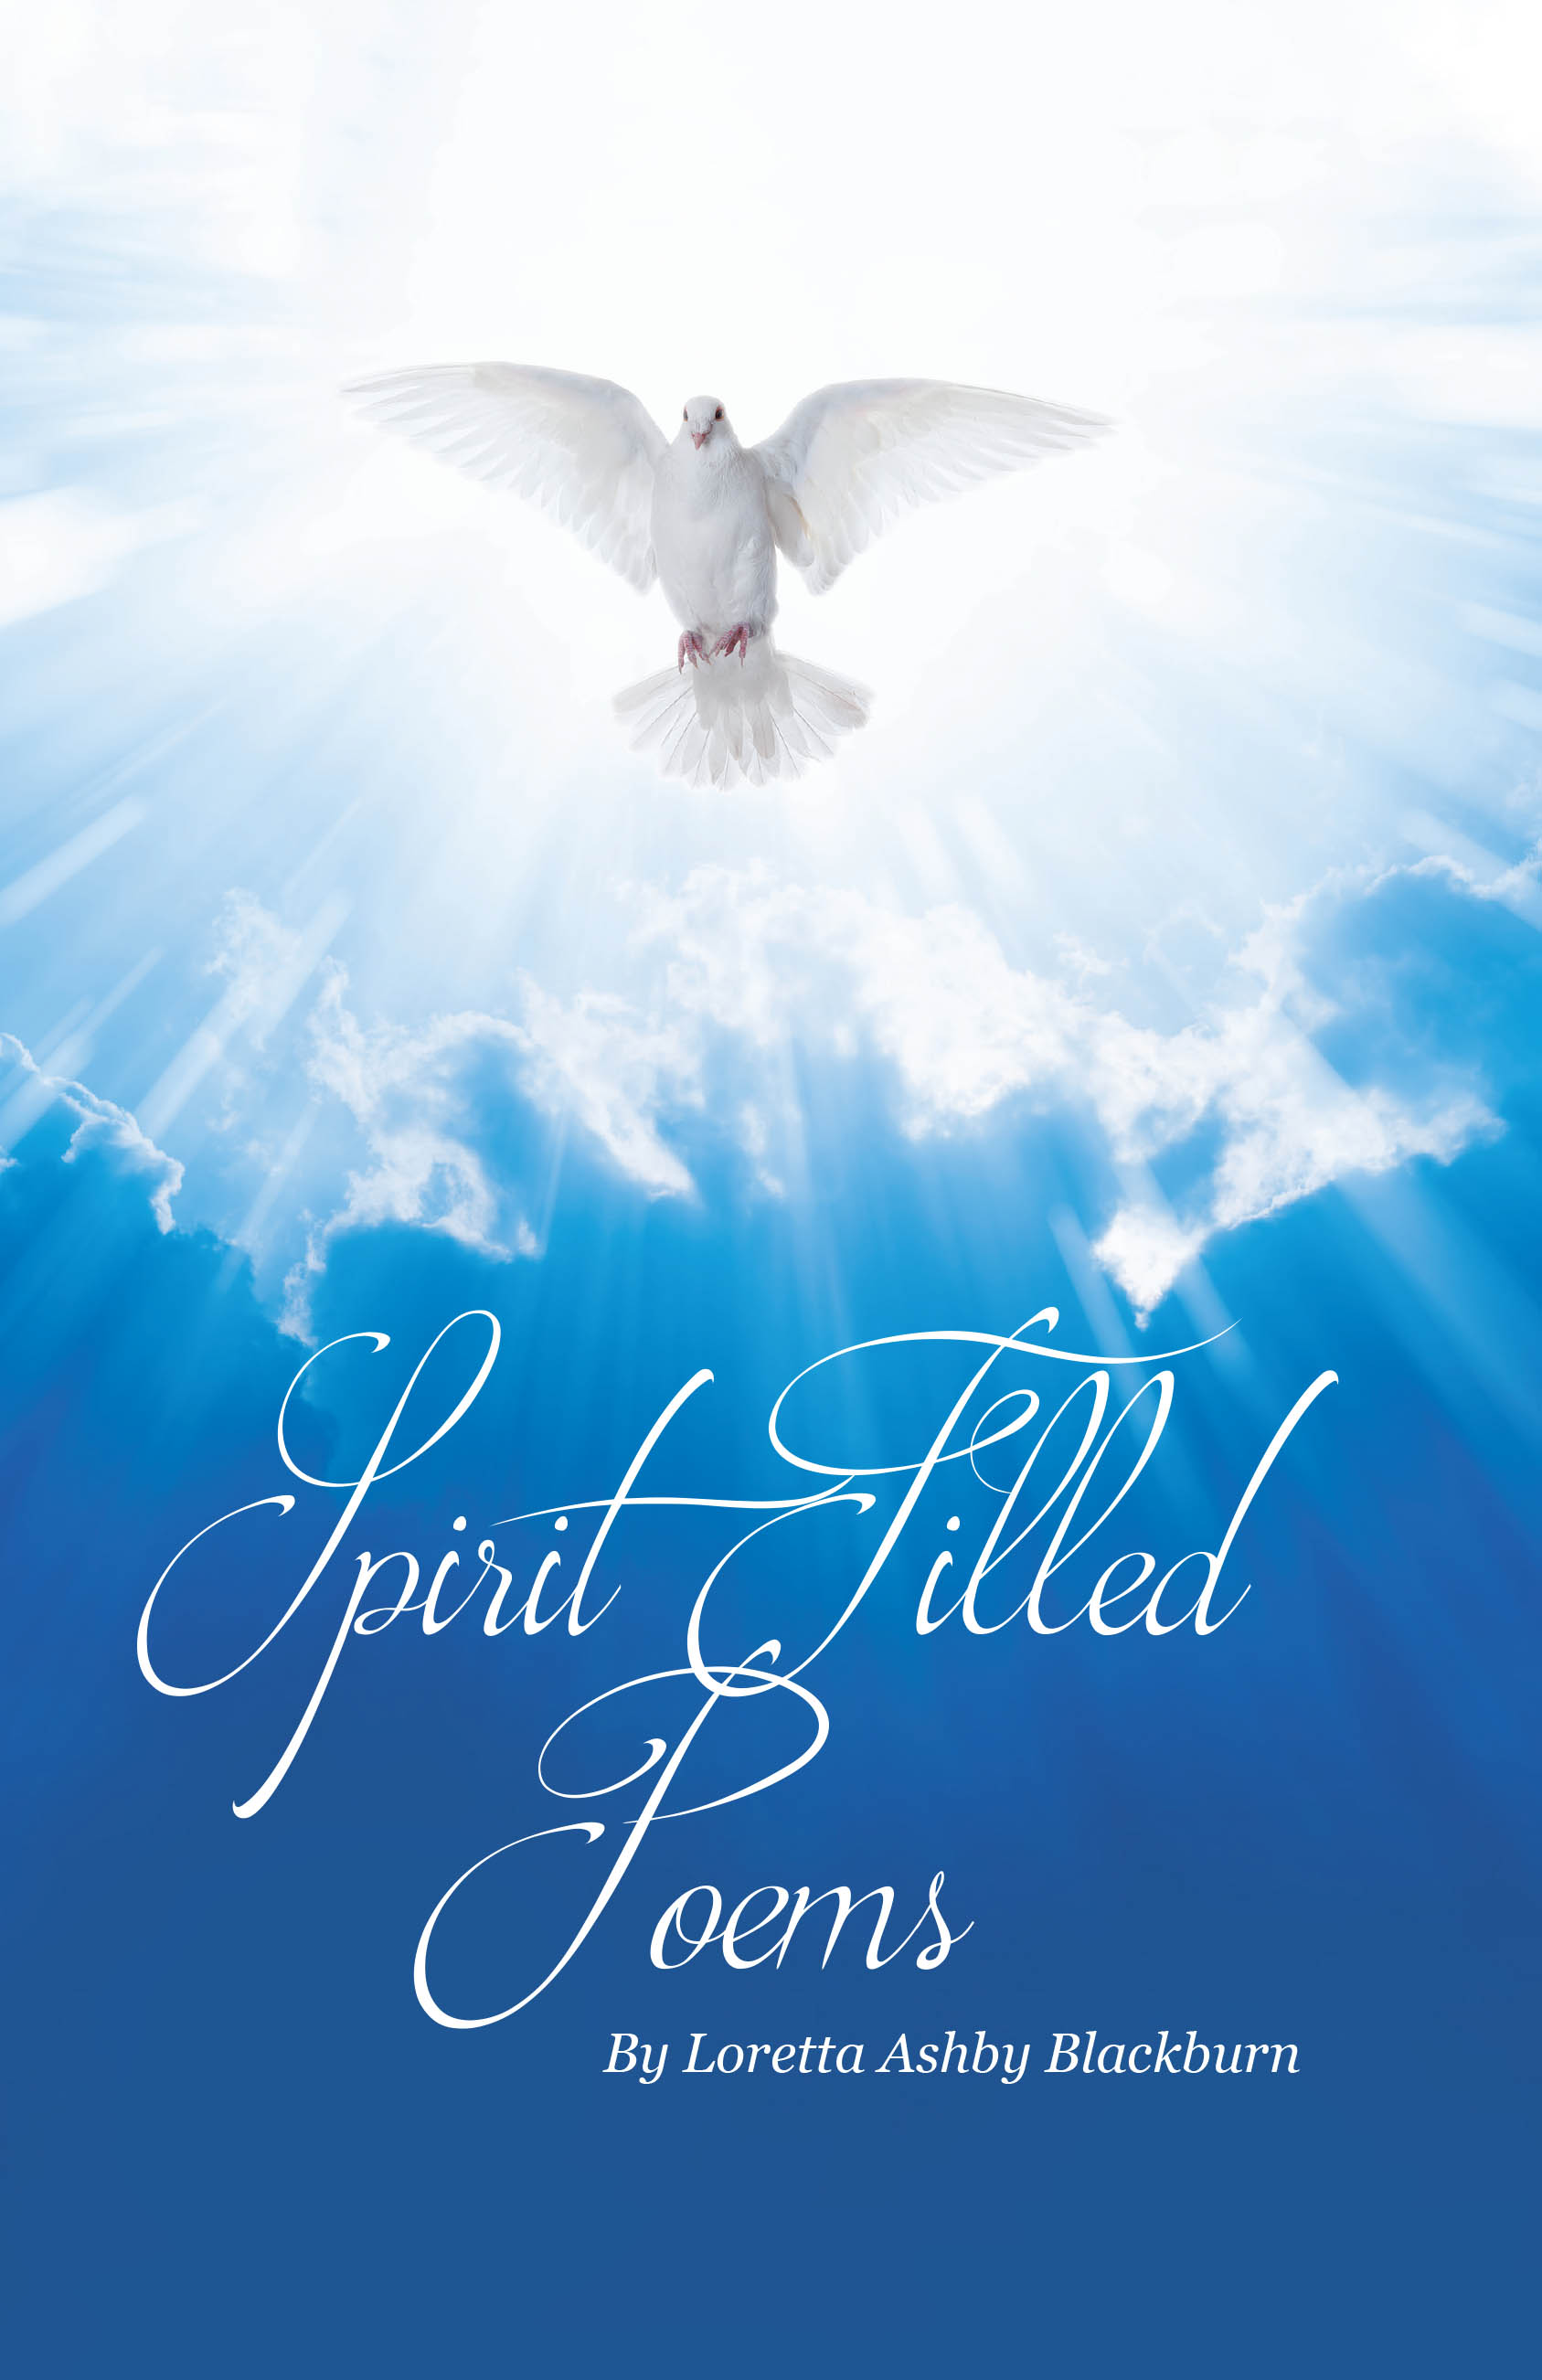 Author Loretta Ashby Blackburn’s New Book, "Spirit-Filled Poems," is an Inspirational Series of Poems Rooted in Faith and Heartfelt Devotion to the Lord